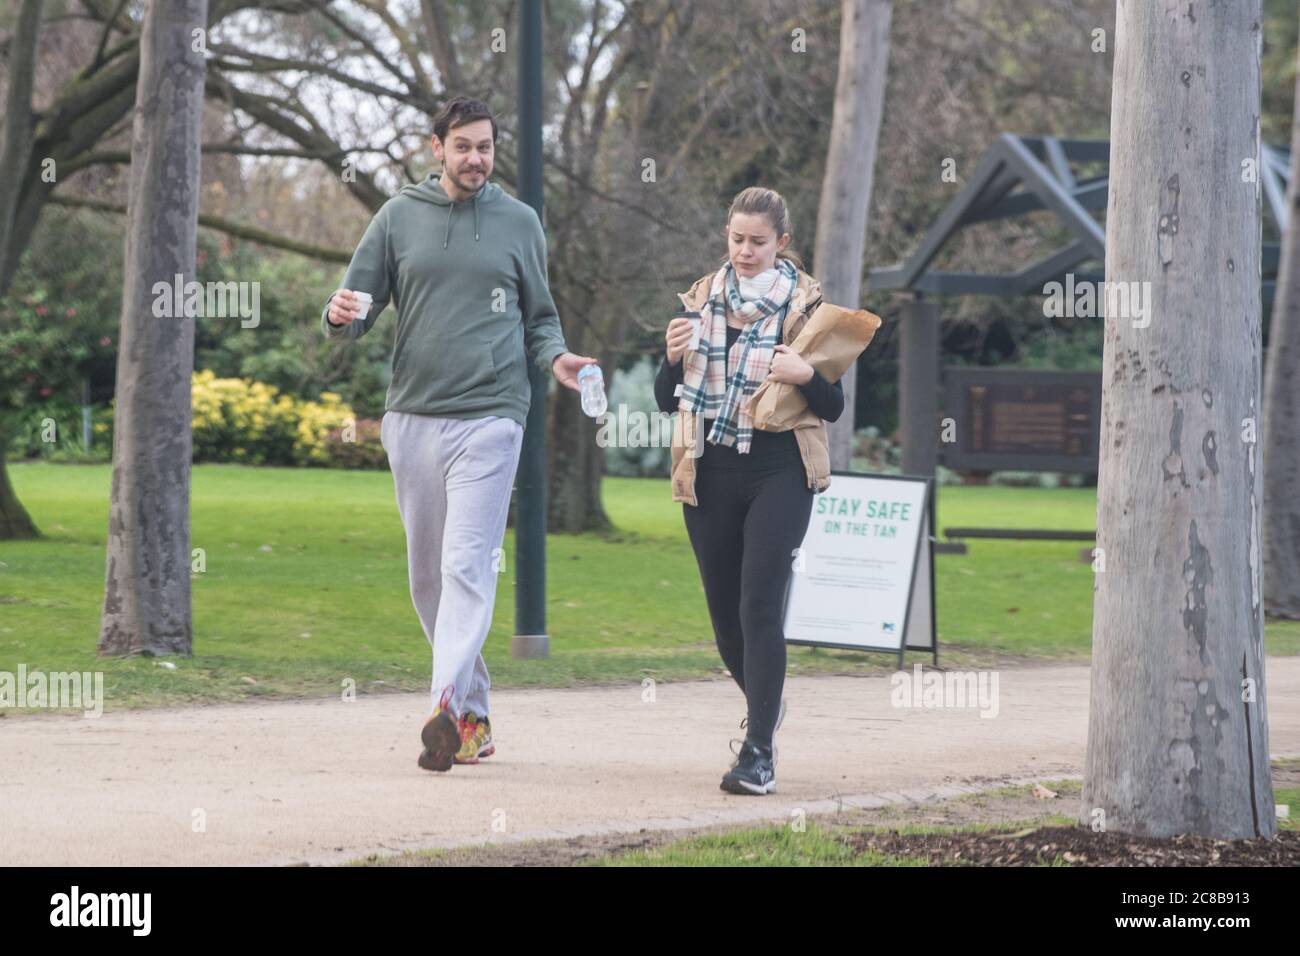 Melbourne, Australia 23 July 2020, a man and woman disregards the requirement to wear a face mask under health directions that came into force today, while walking on the Tan walking track around Melbourne’s Botanical Gardens. Credit: Michael Currie/Alamy Live News Stock Photo